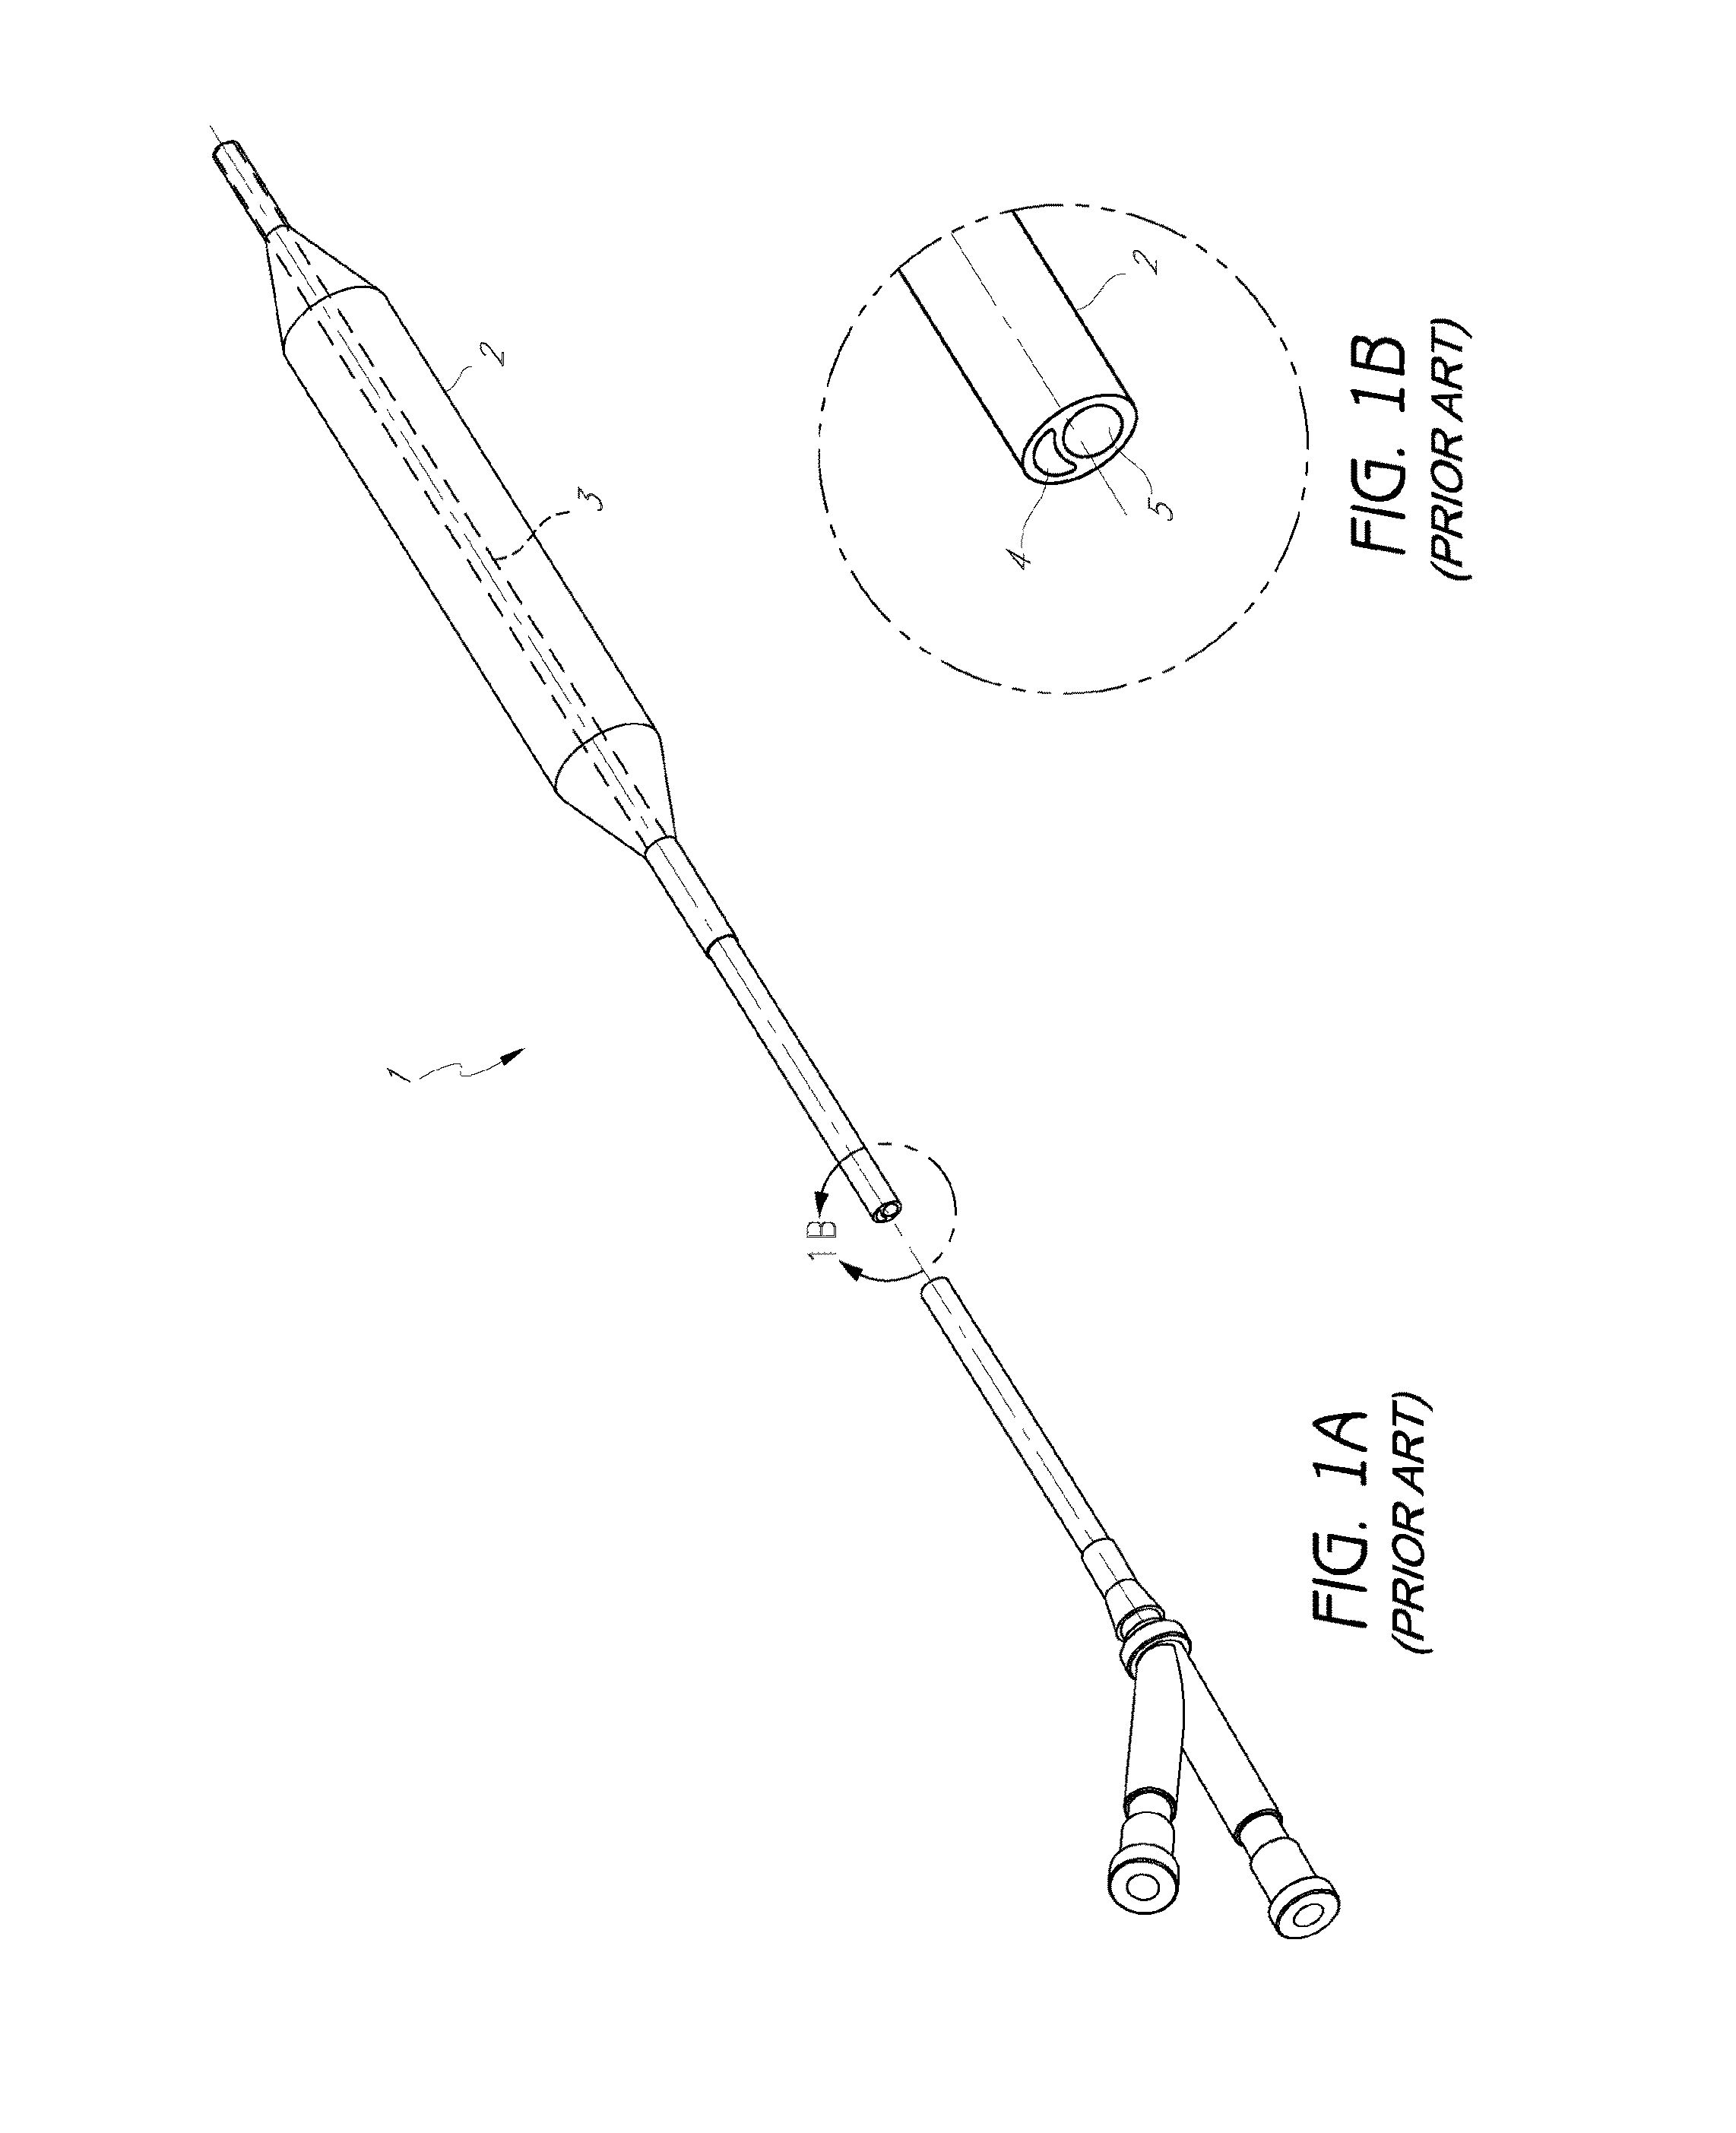 Nested balloons for medical applications and methods for manufacturing the same